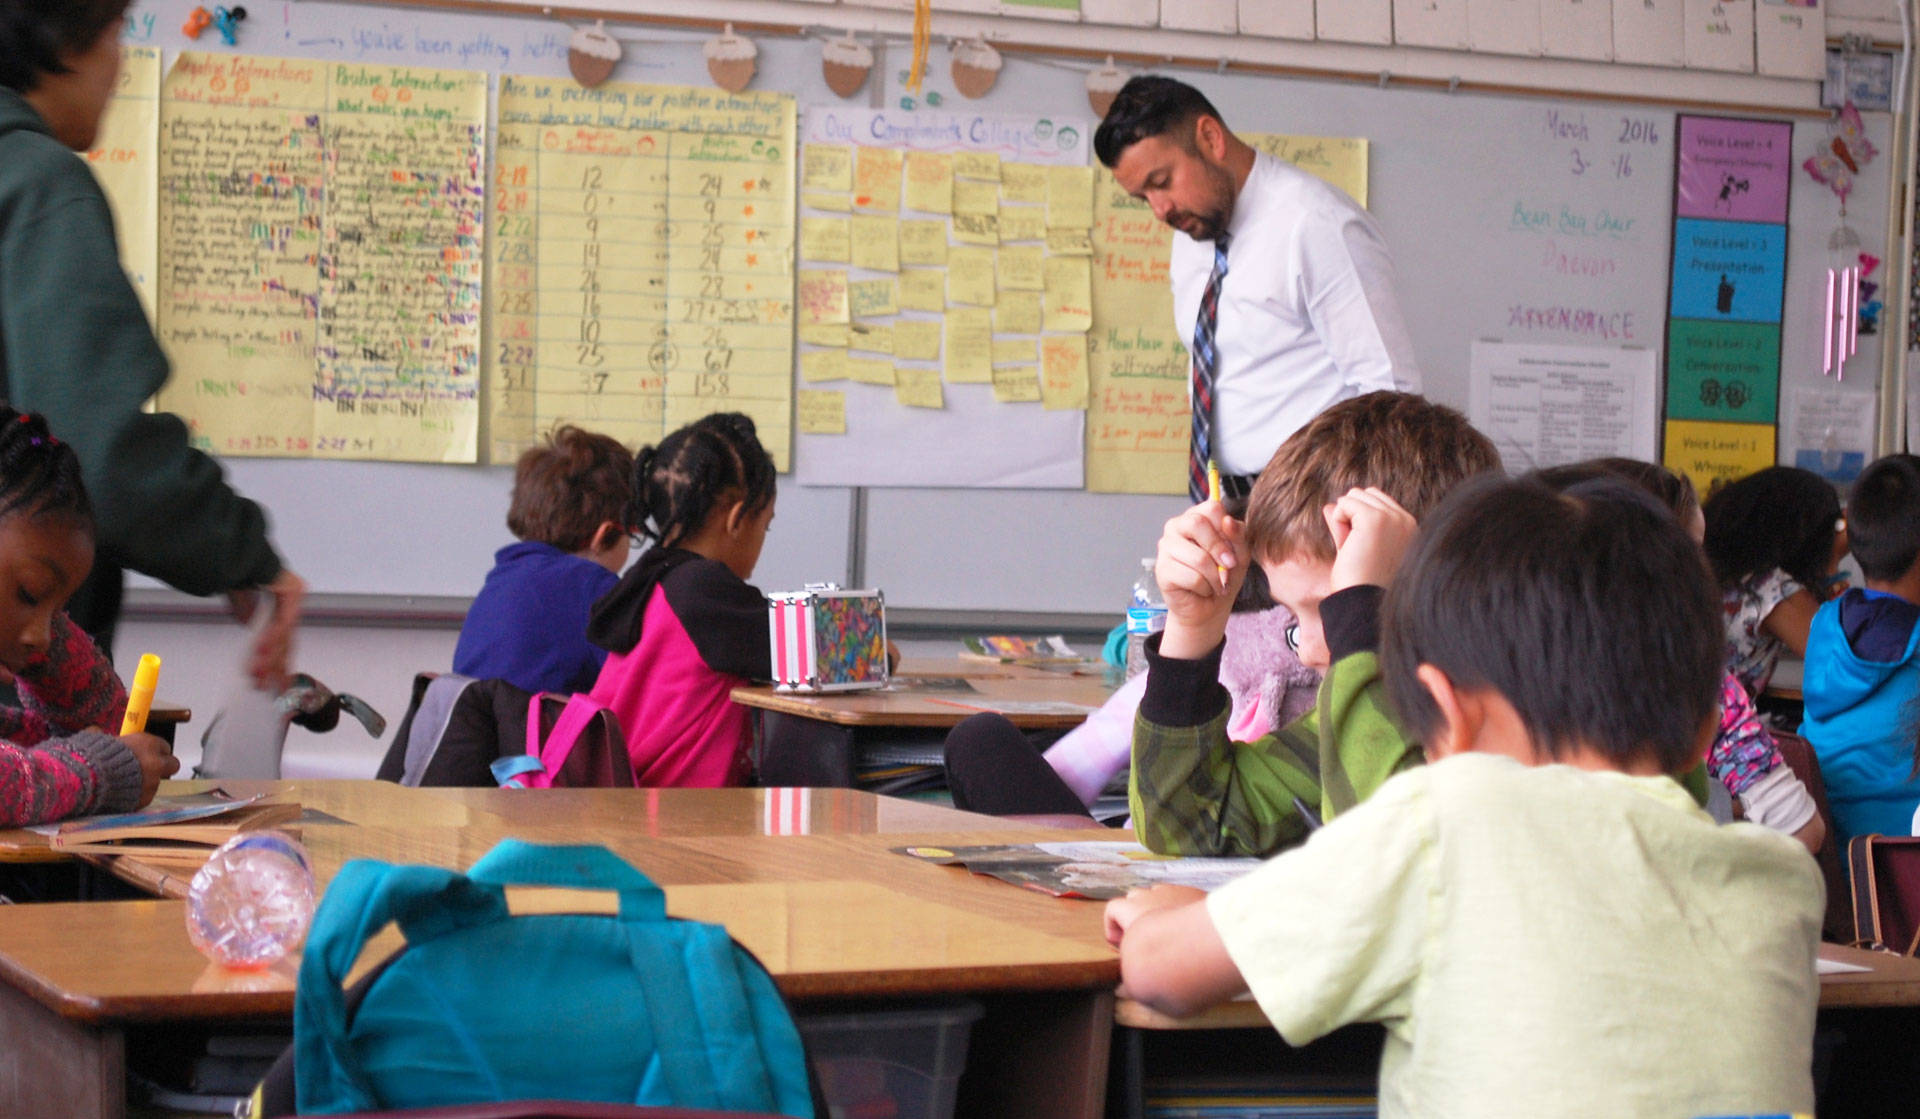 Once the worst performing schools in the state, Oak Ridge Elementary is now a bright spot in an economically depressed neighborhood in Sacramento. Gabriel Salcedo/KQED